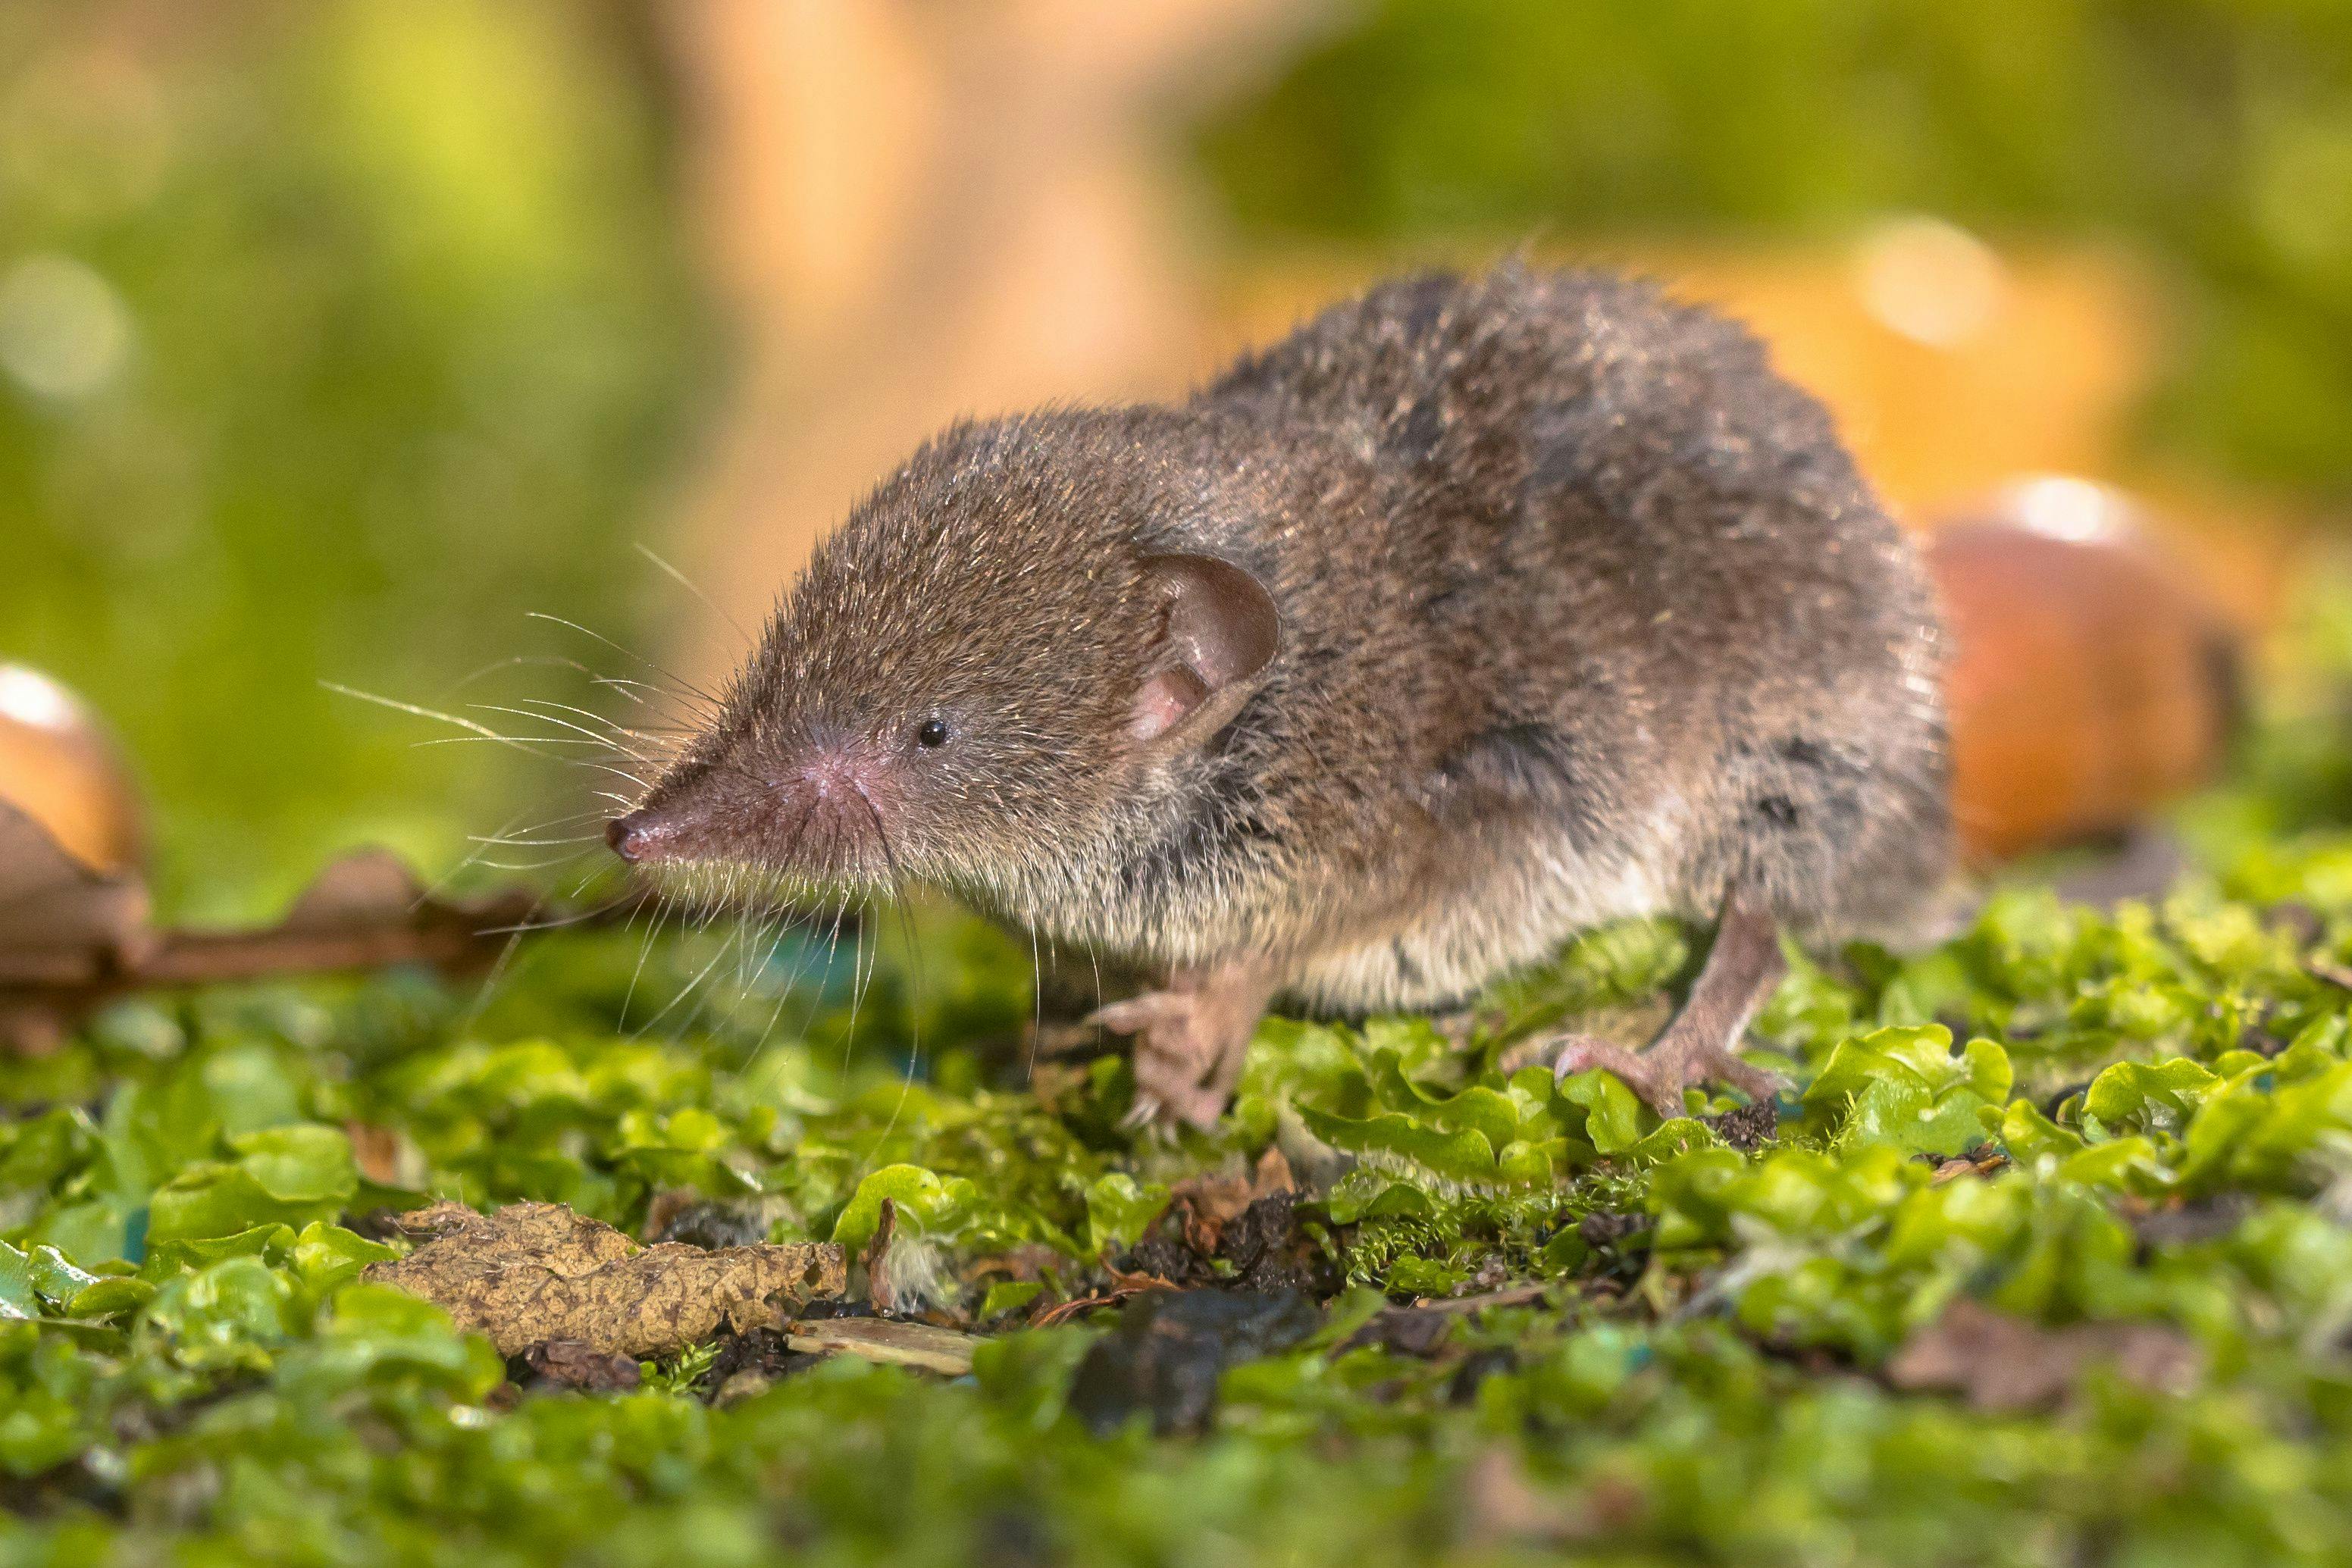 Langya virus, a new type of henipavirus, was identified in at least 35 people in eastern China. The virus is suspected to have infected shrews before jumping to humans.